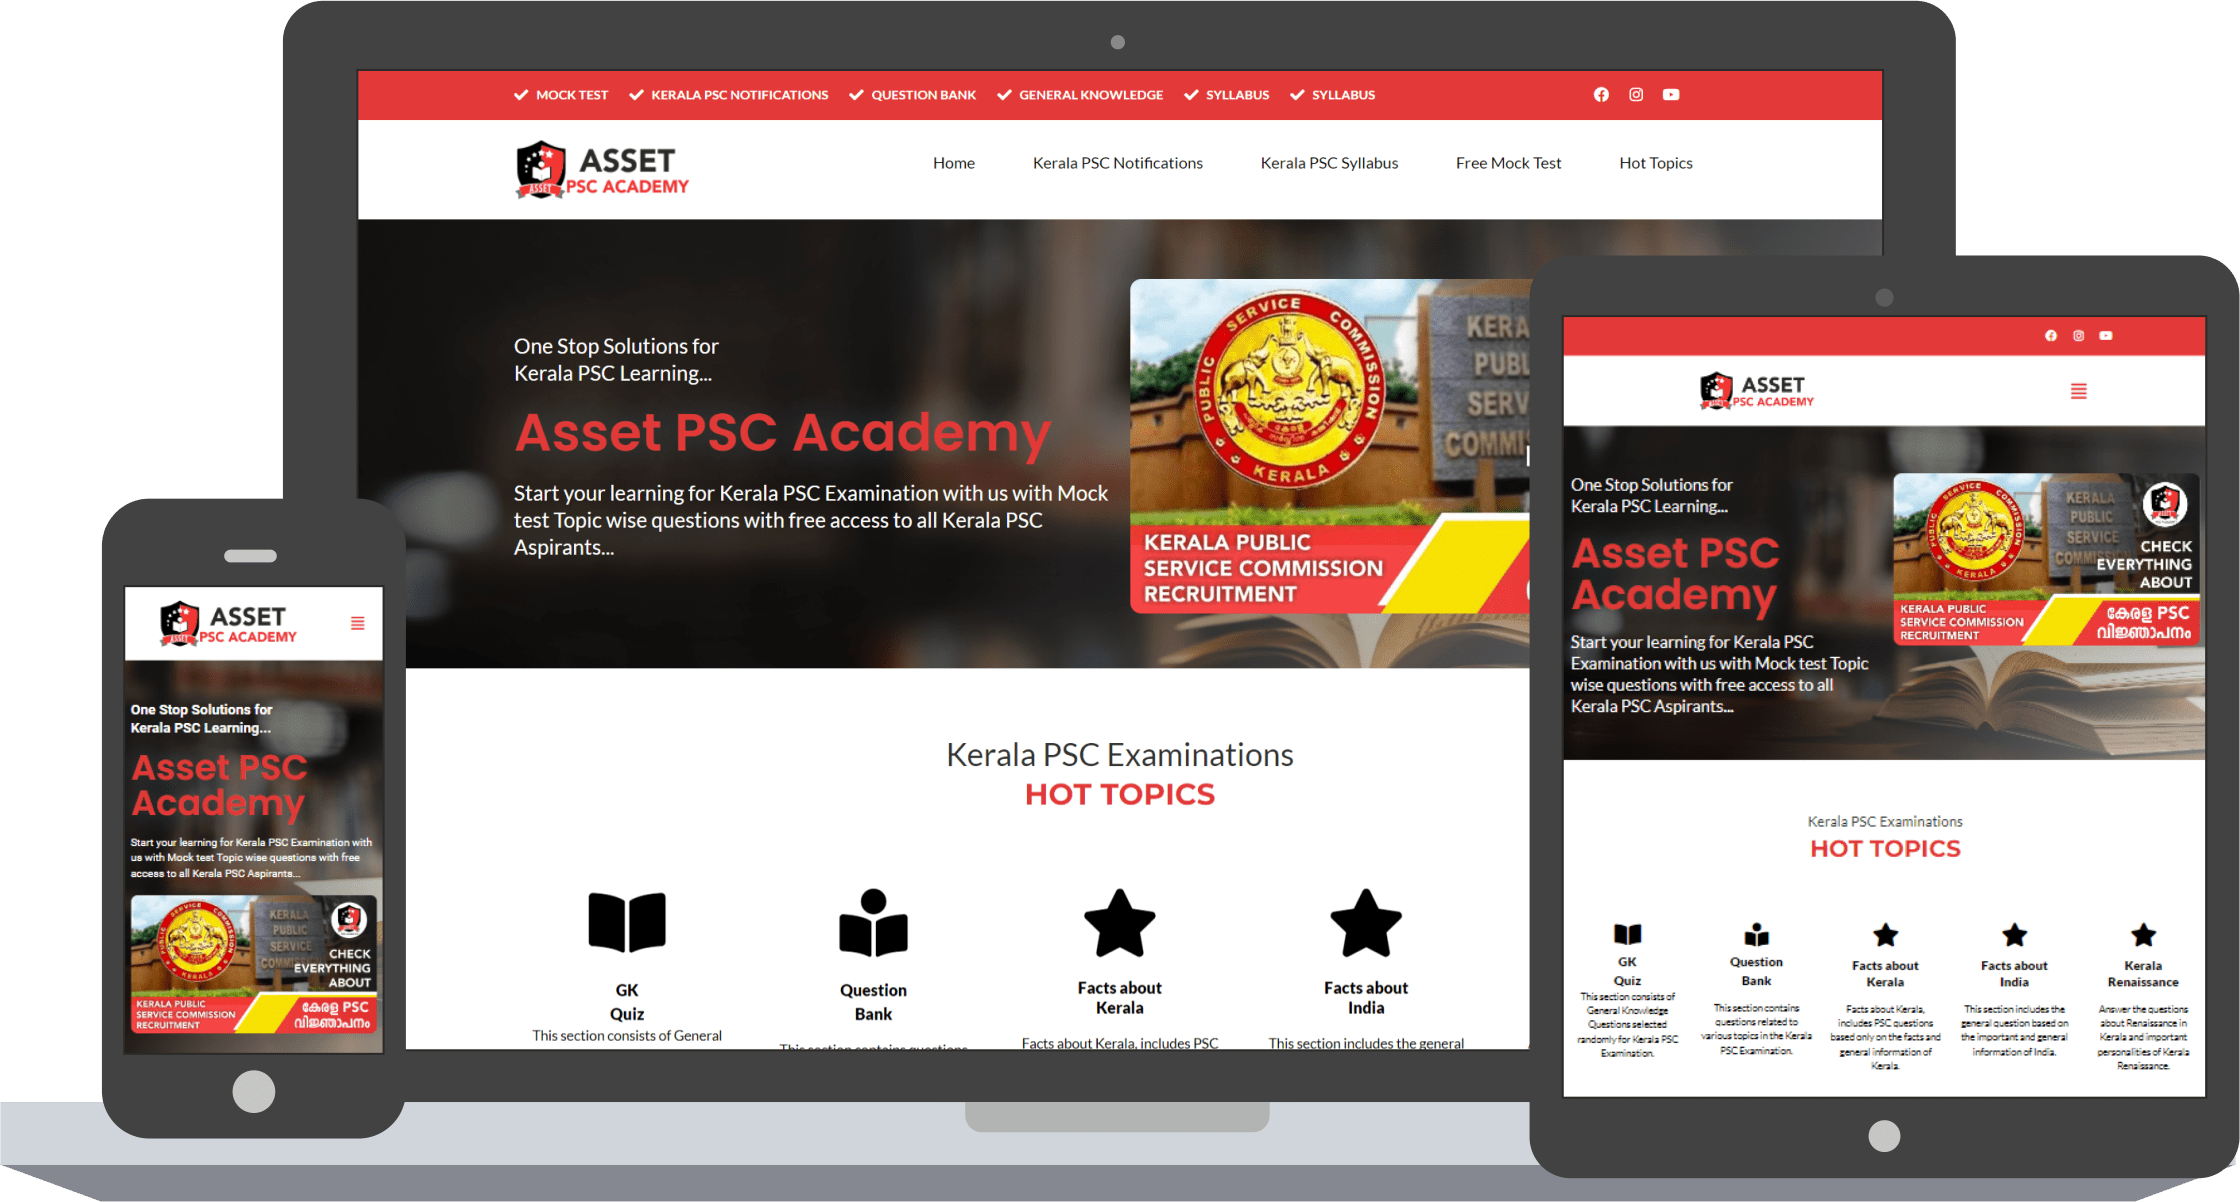 Project Name: Asset PSC Academy